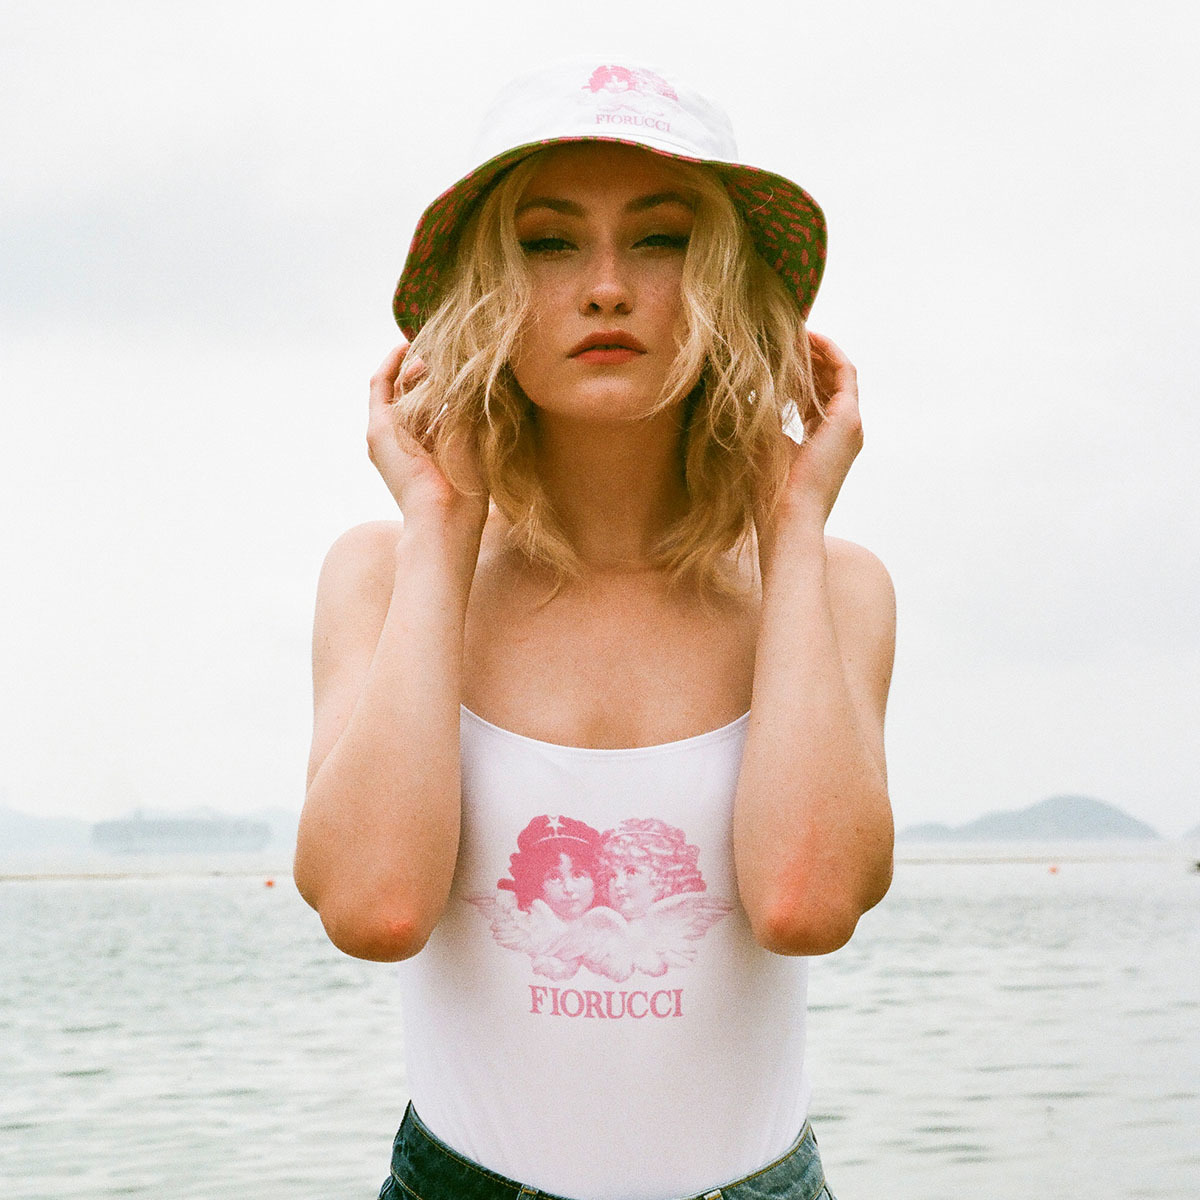 HBX X Fiorucci Just Launched A Summer Capsule And It’s Heaven On Earth